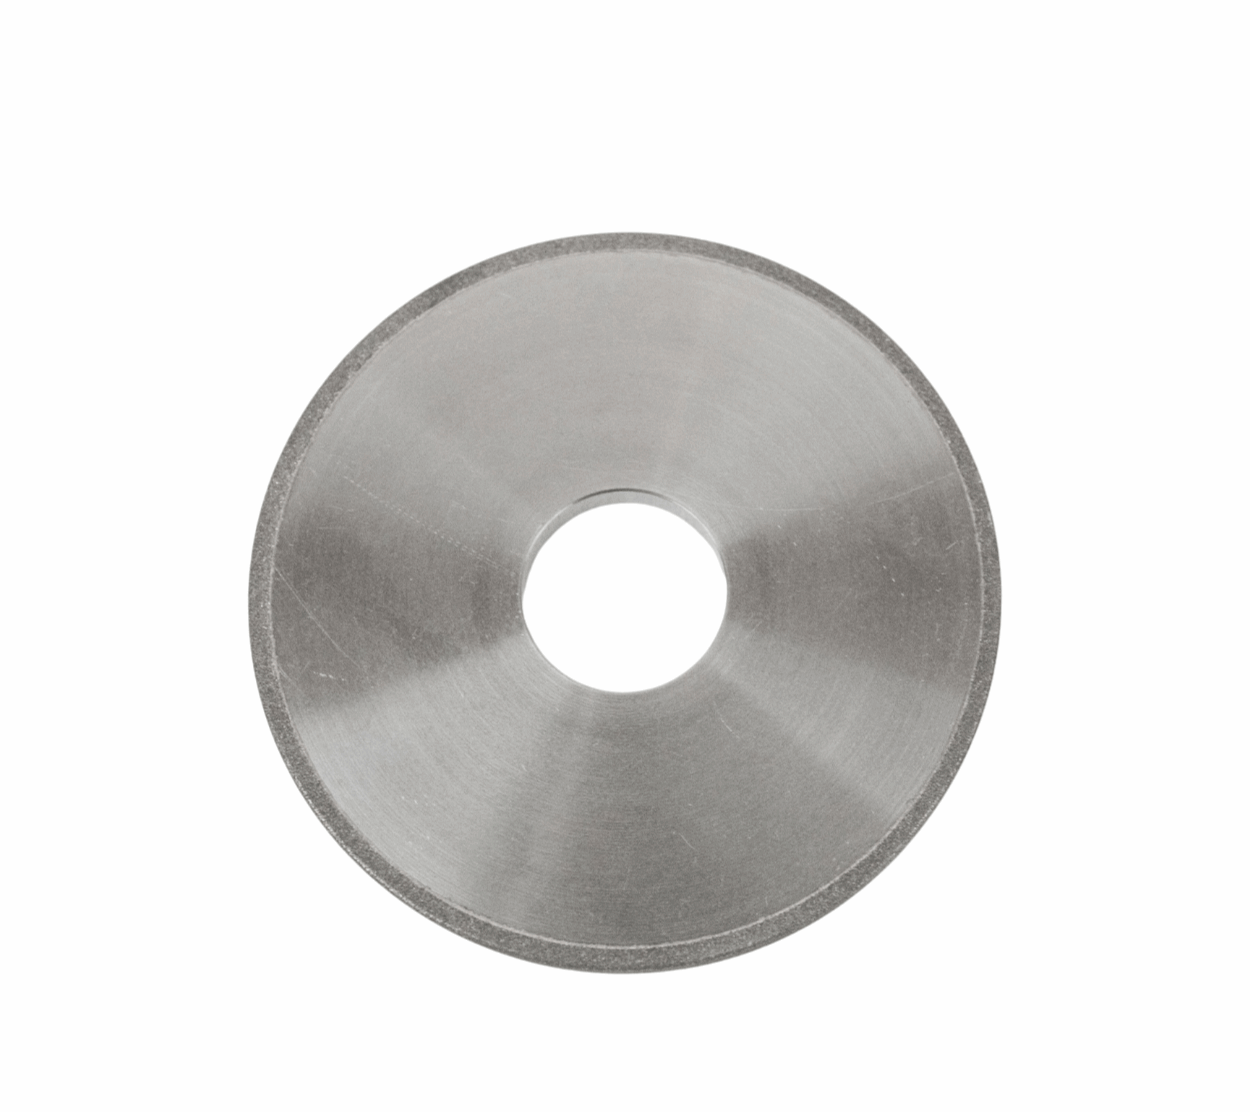 Diamond Grinding Wheel Fitting F.Dick Rd-75 and RS-150 Duo Knife Sharpeners. Replaces 98052047 front view